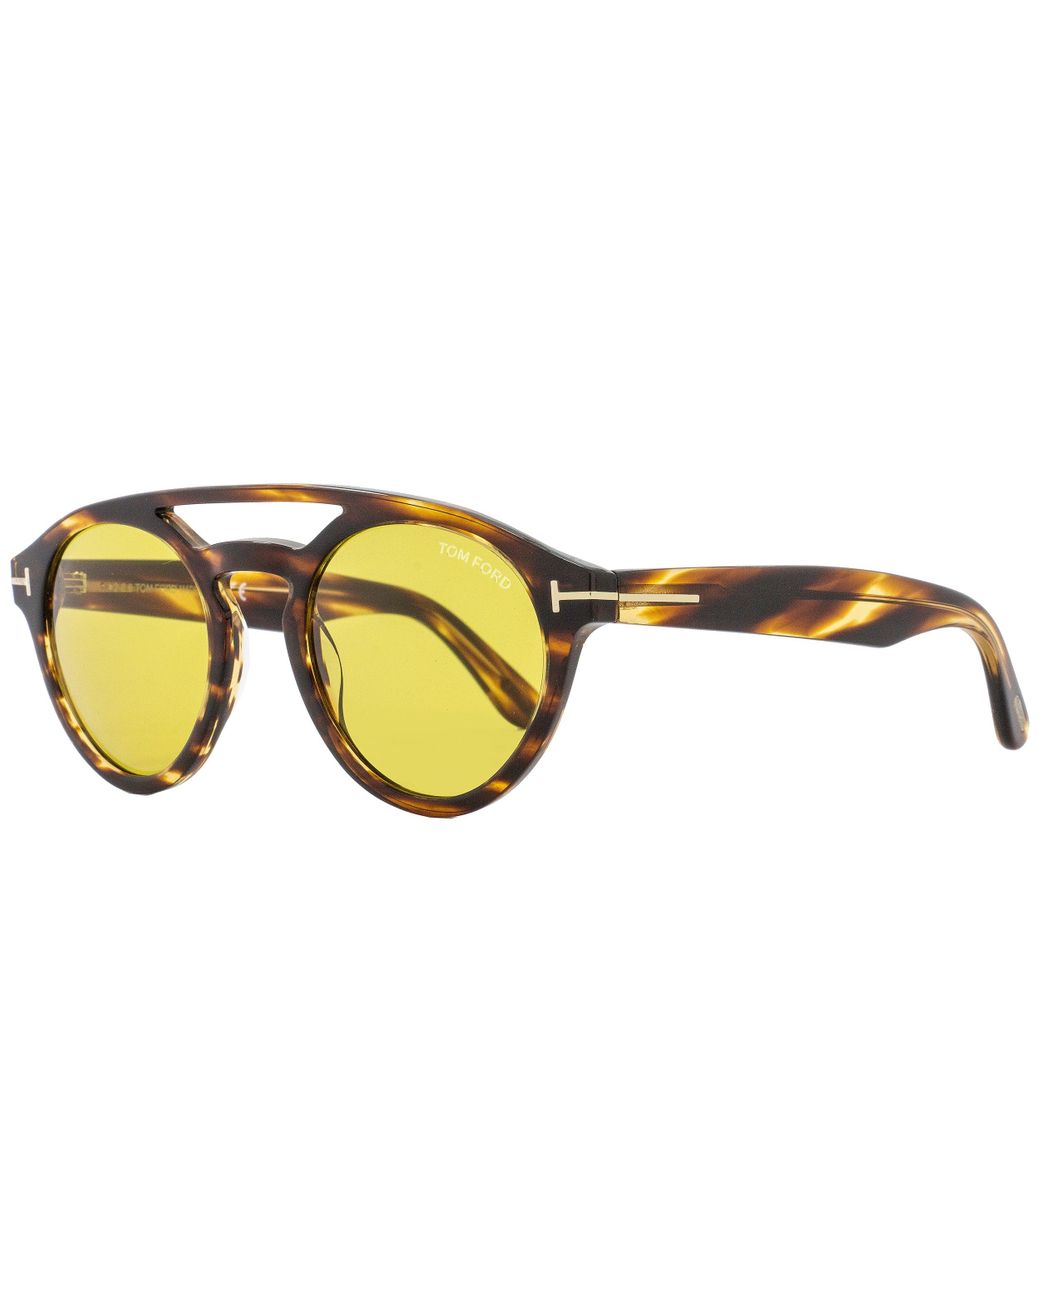 Tom Ford Sunglasses Tf537 Clint Striped Brown 50mm in Black | Lyst